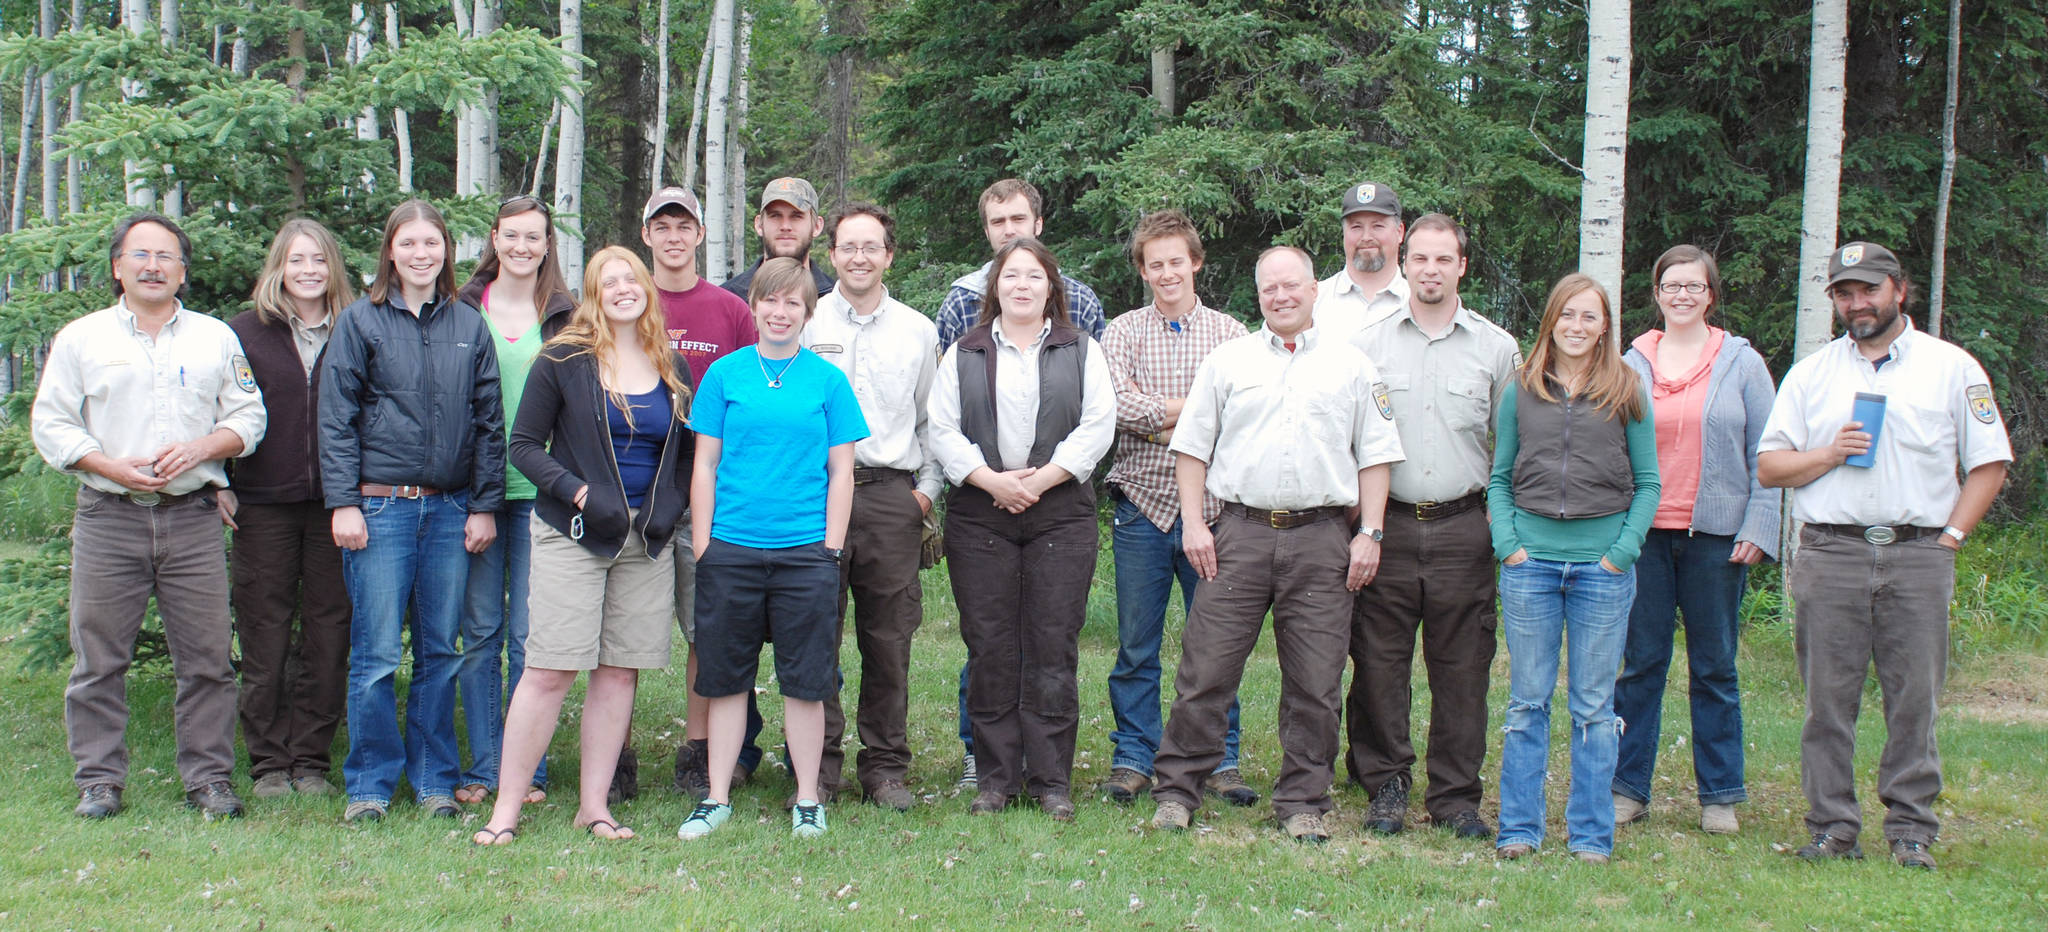 Permanent and seasonal staff from the Kenai National Wildlife Refuge who helped estimate the Kenai brown bear population in 2010. (Photo provided by Kenai National Wildlife Refuge)